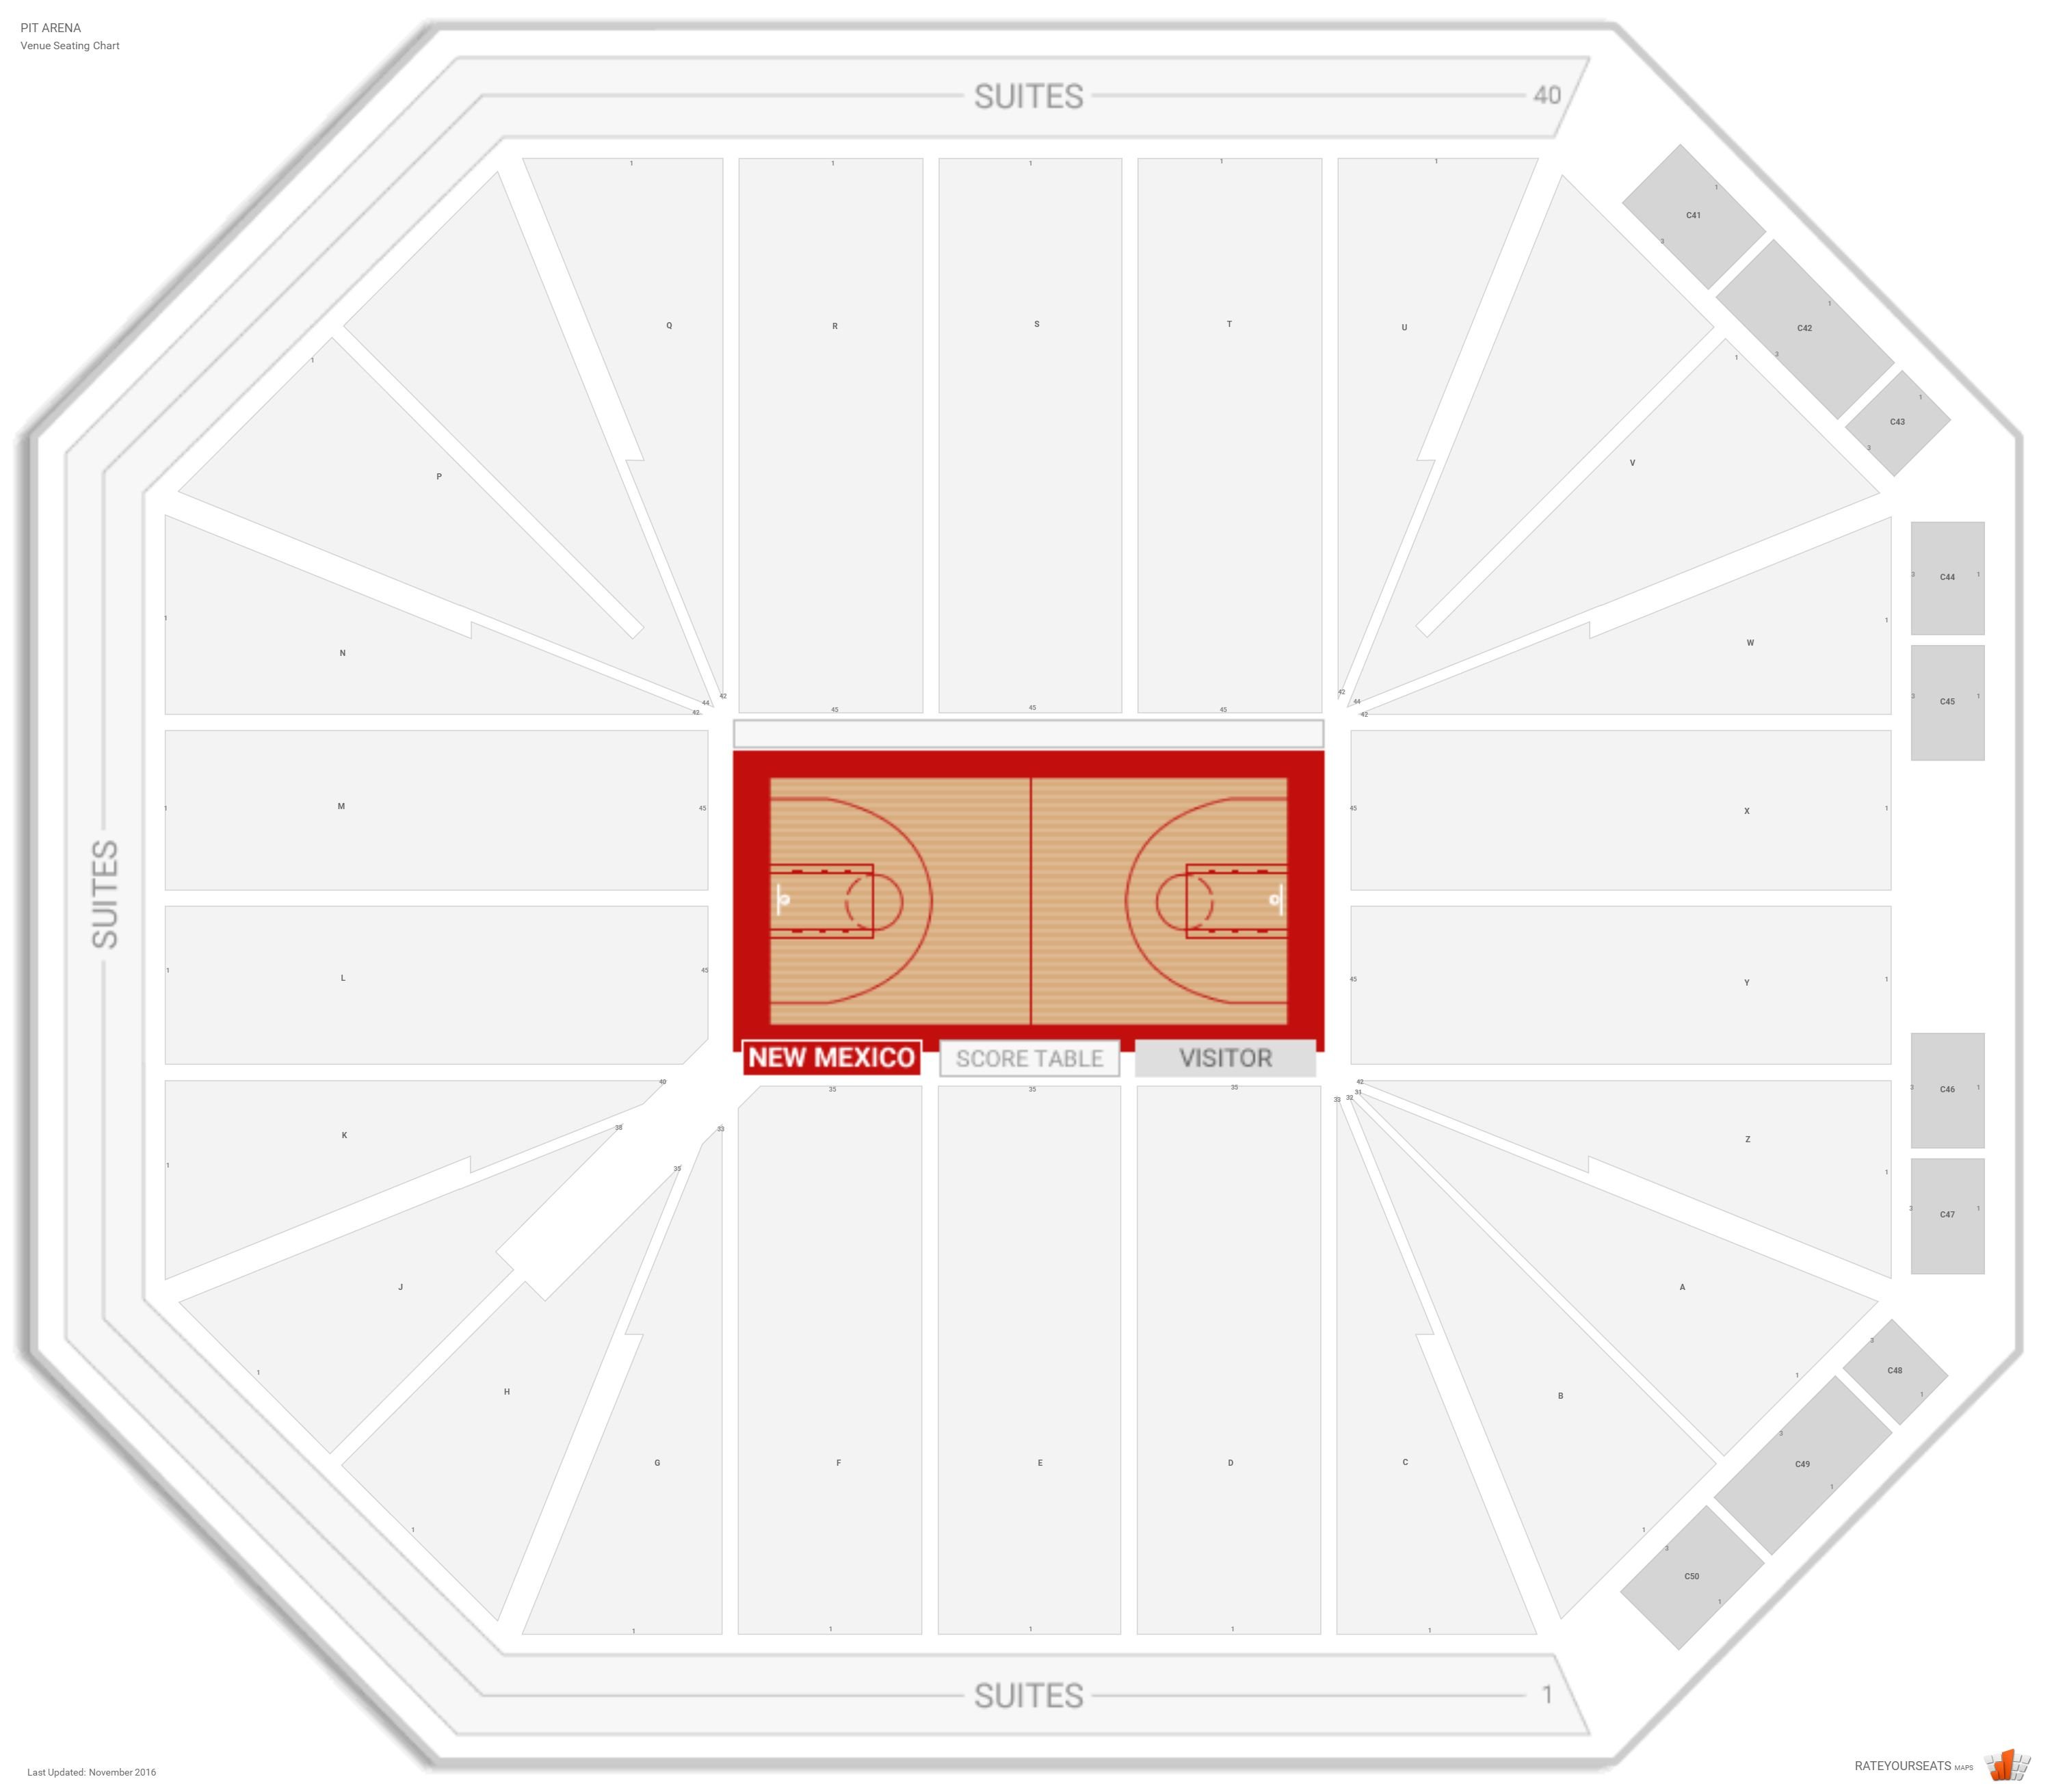 Dreamstyle Arena Seating Chart